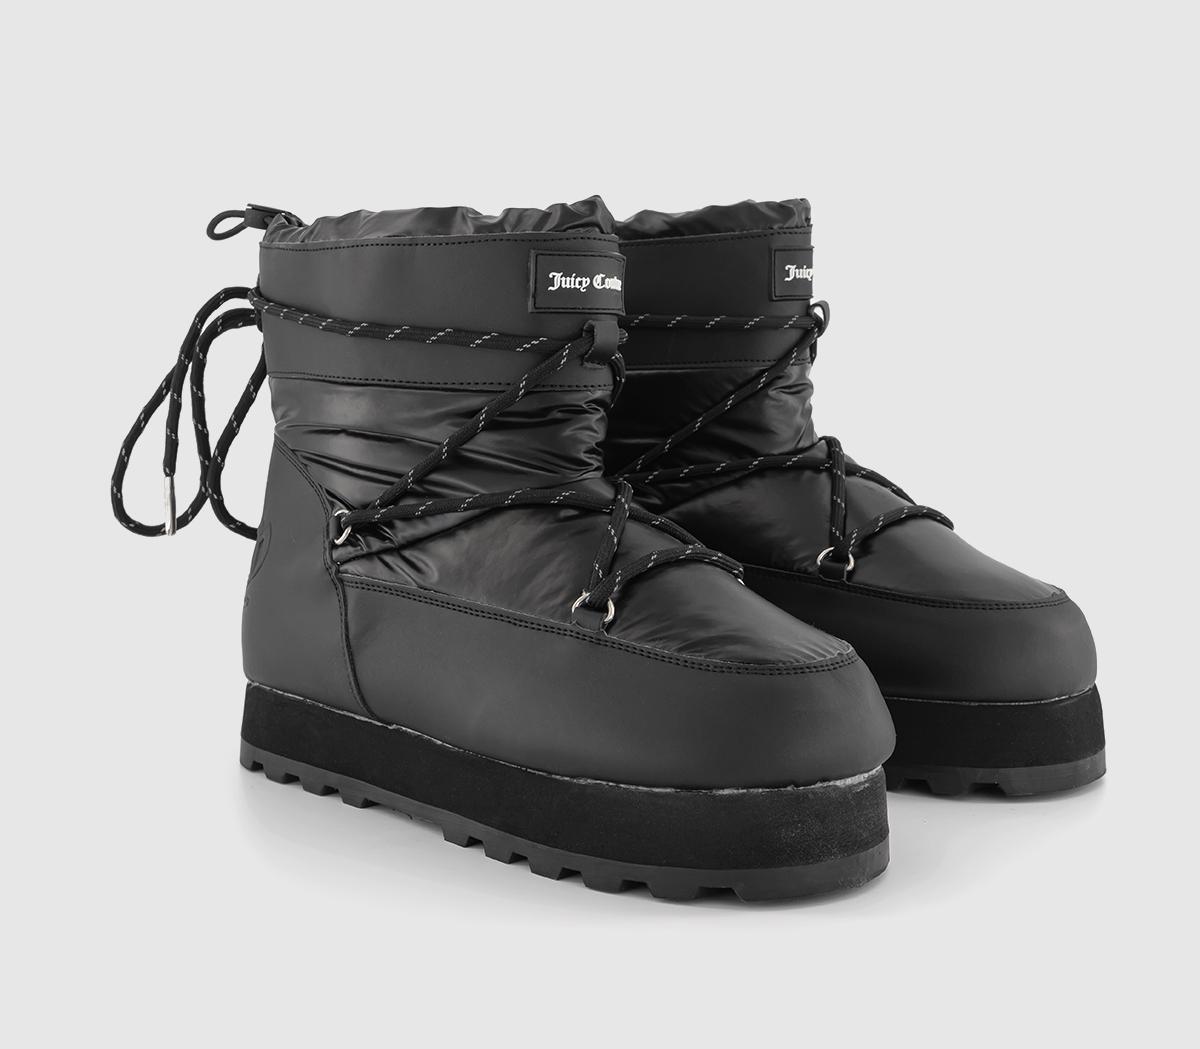 Juicy Couture Womens Mars Boots Black, 8